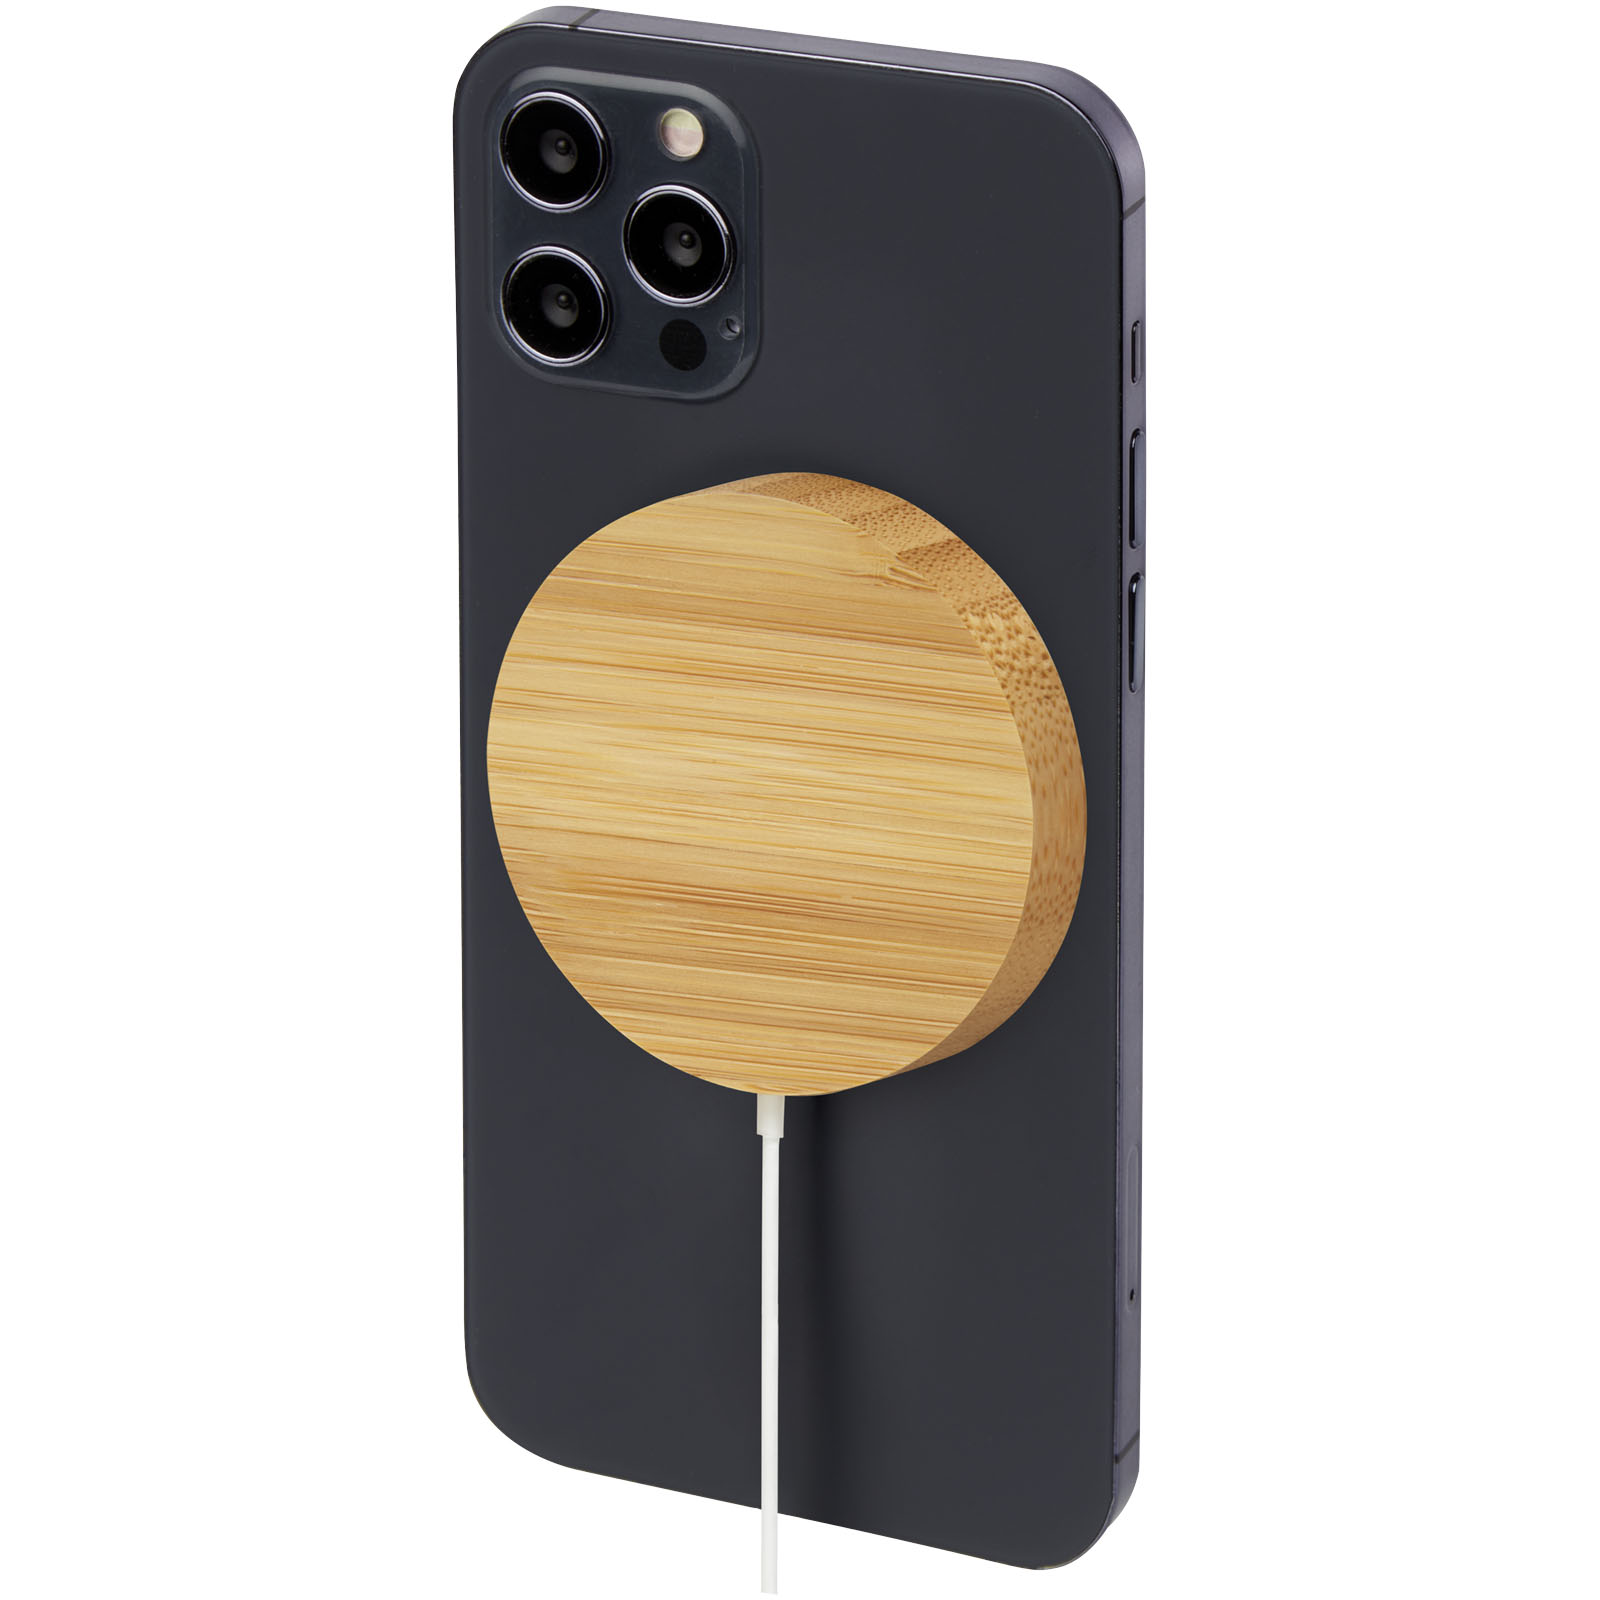 Advertising Wireless Charging - Atra 10W bamboo magnetic wireless charging pad - 5